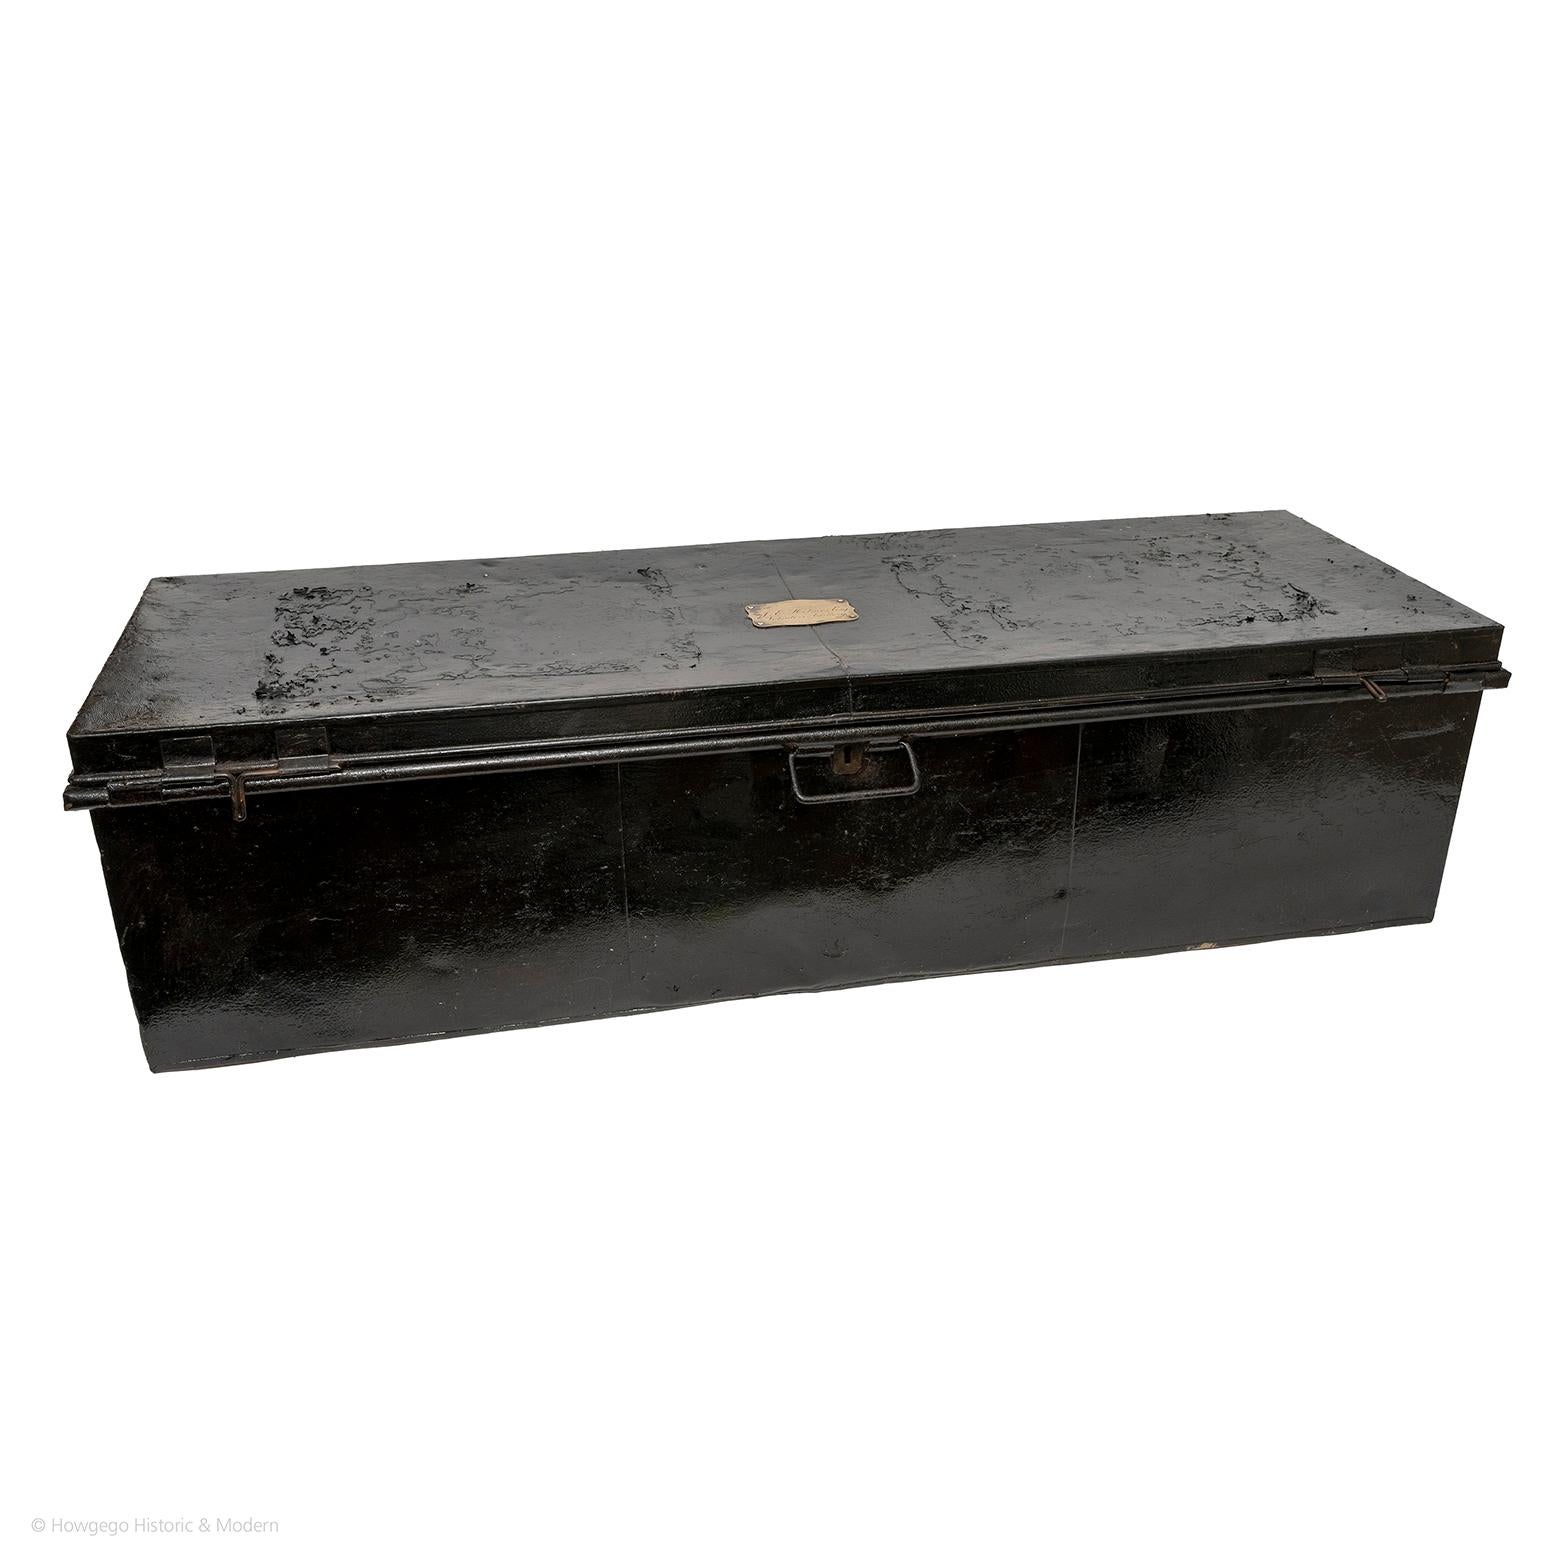 Long black metal trunk, bearing brass label inscribed 'J E Holmes Esq, Volunteer Artillery'. Metal carrying handles. Locks no keys. Wonderful deep and rich patina reflecting their history from years of travel

Can be repurposed as a chests on stands